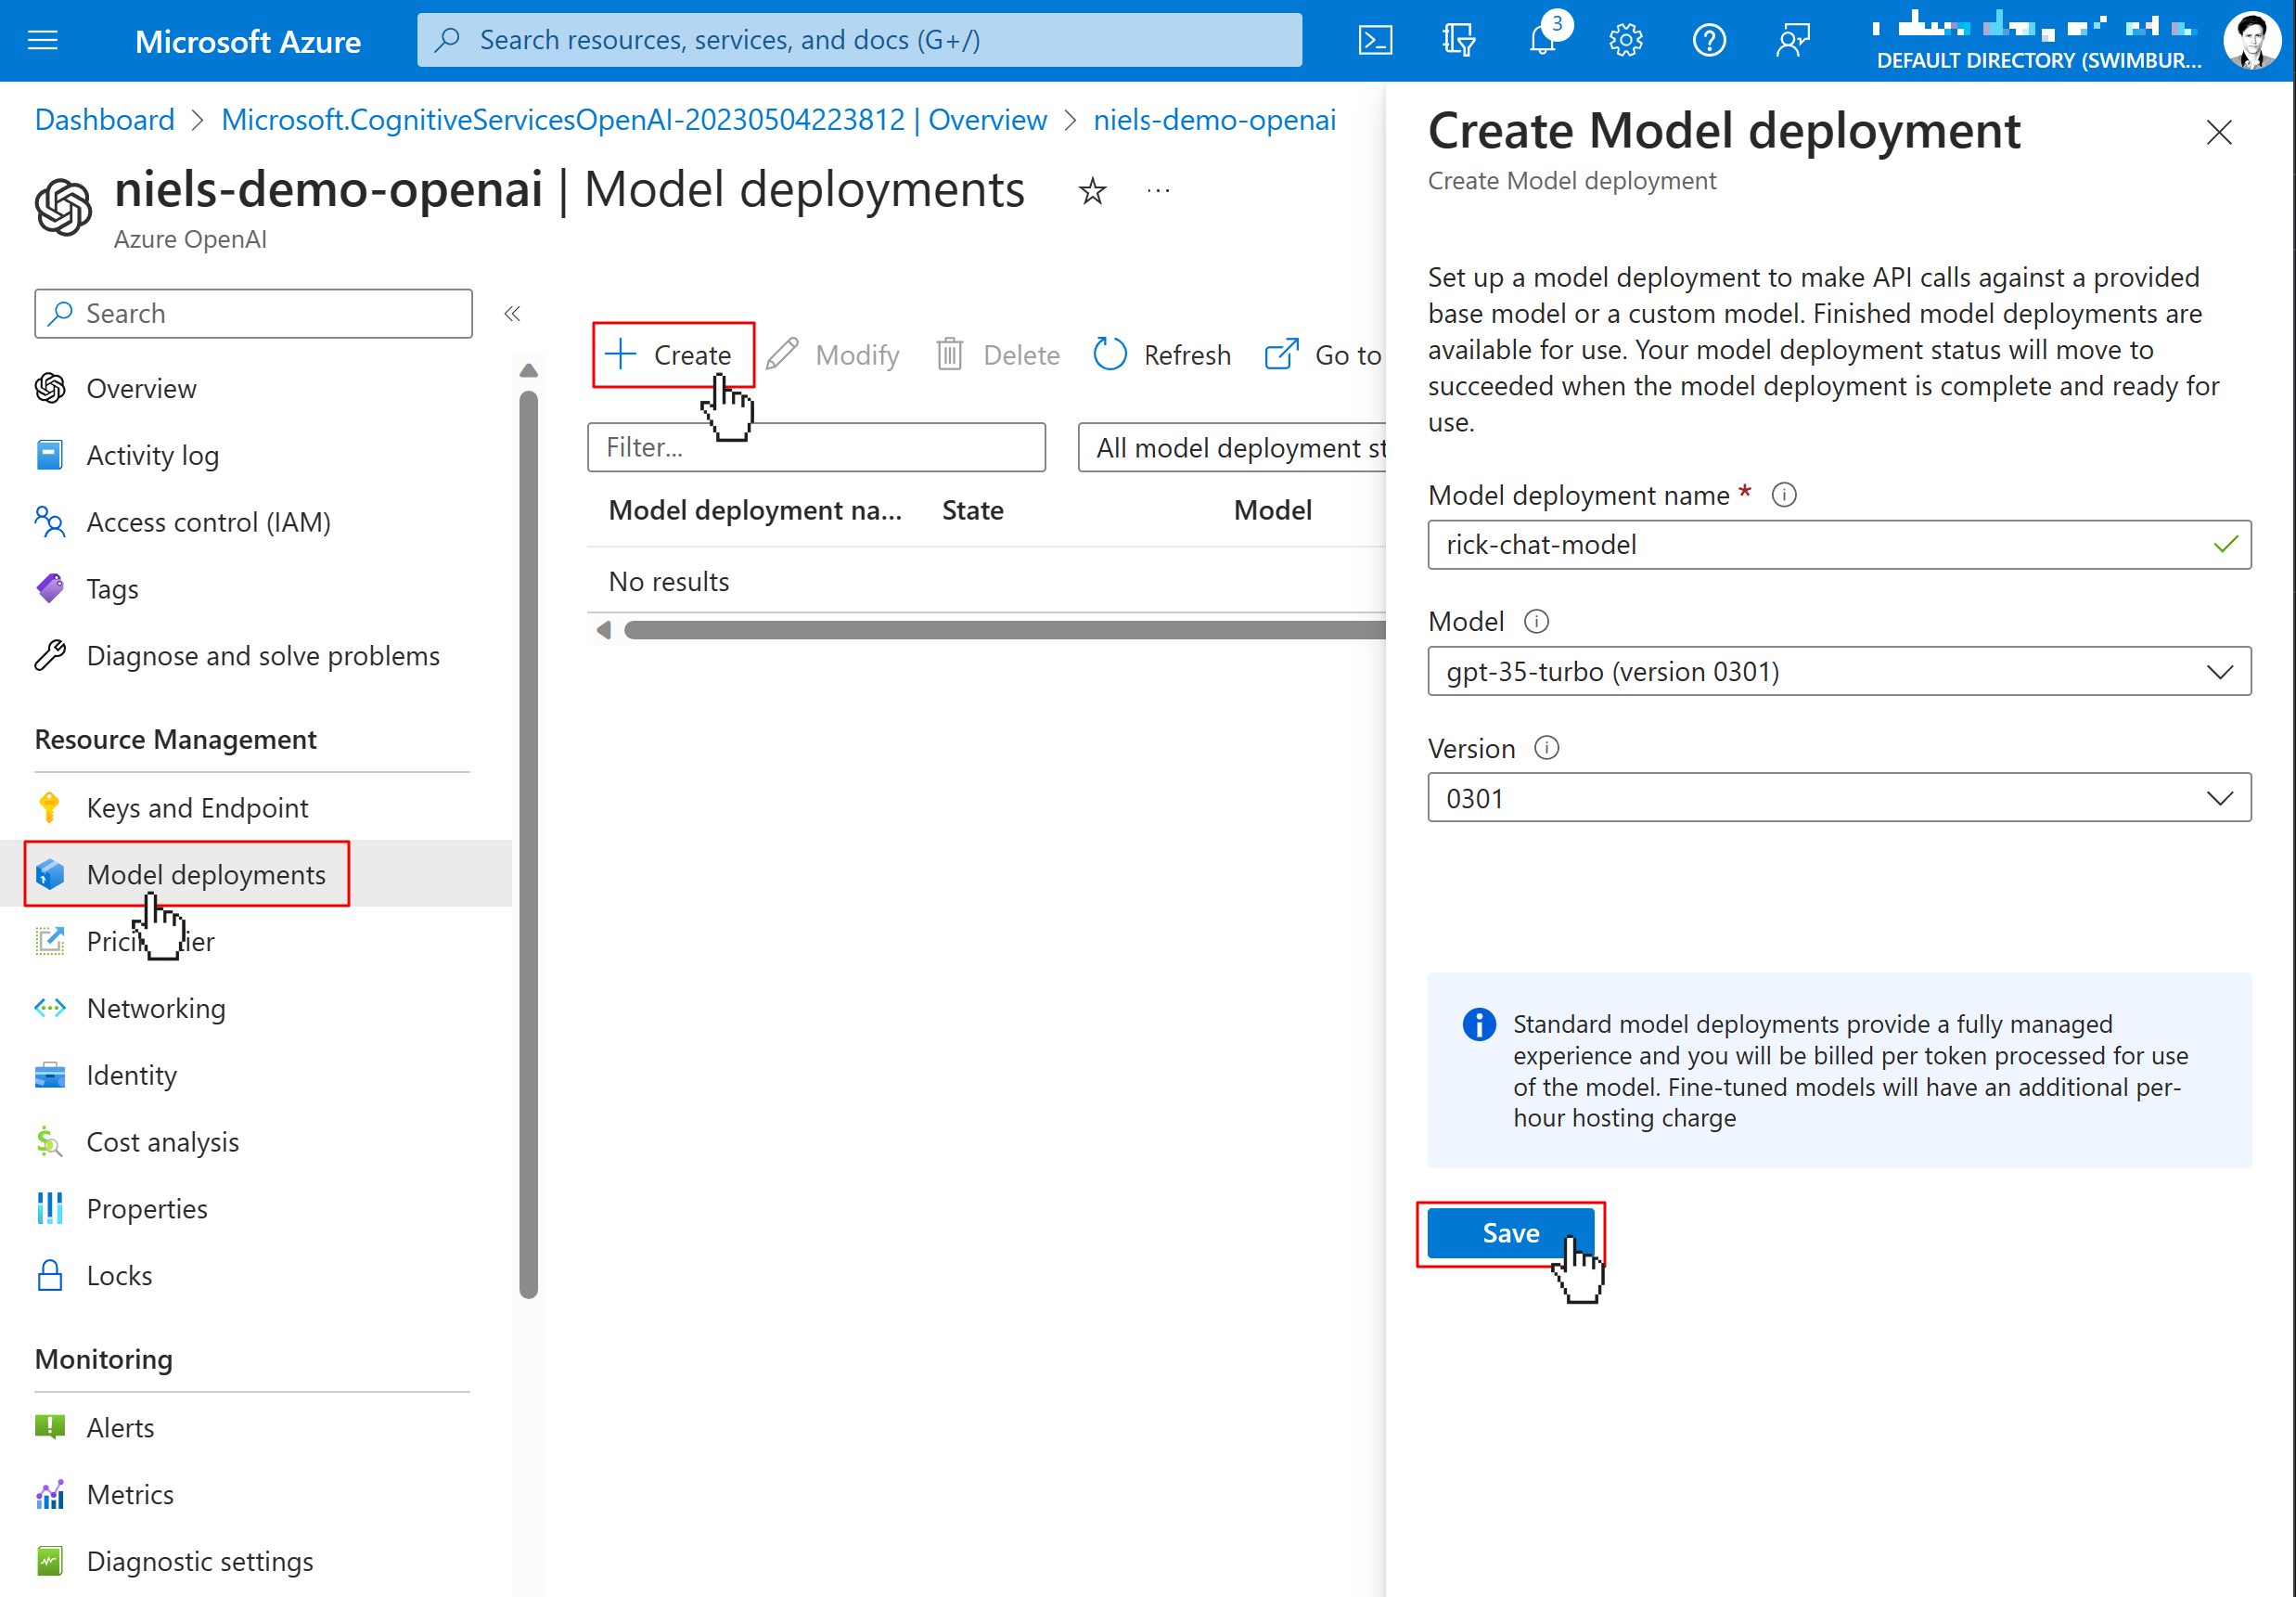 User navigates to the Model deployments tab using the left side navigation of the Azure OpenAI service. User then clicks Create button which opens the Create Model deployment modal. User fills out the form as described below, and clicks the Save button.